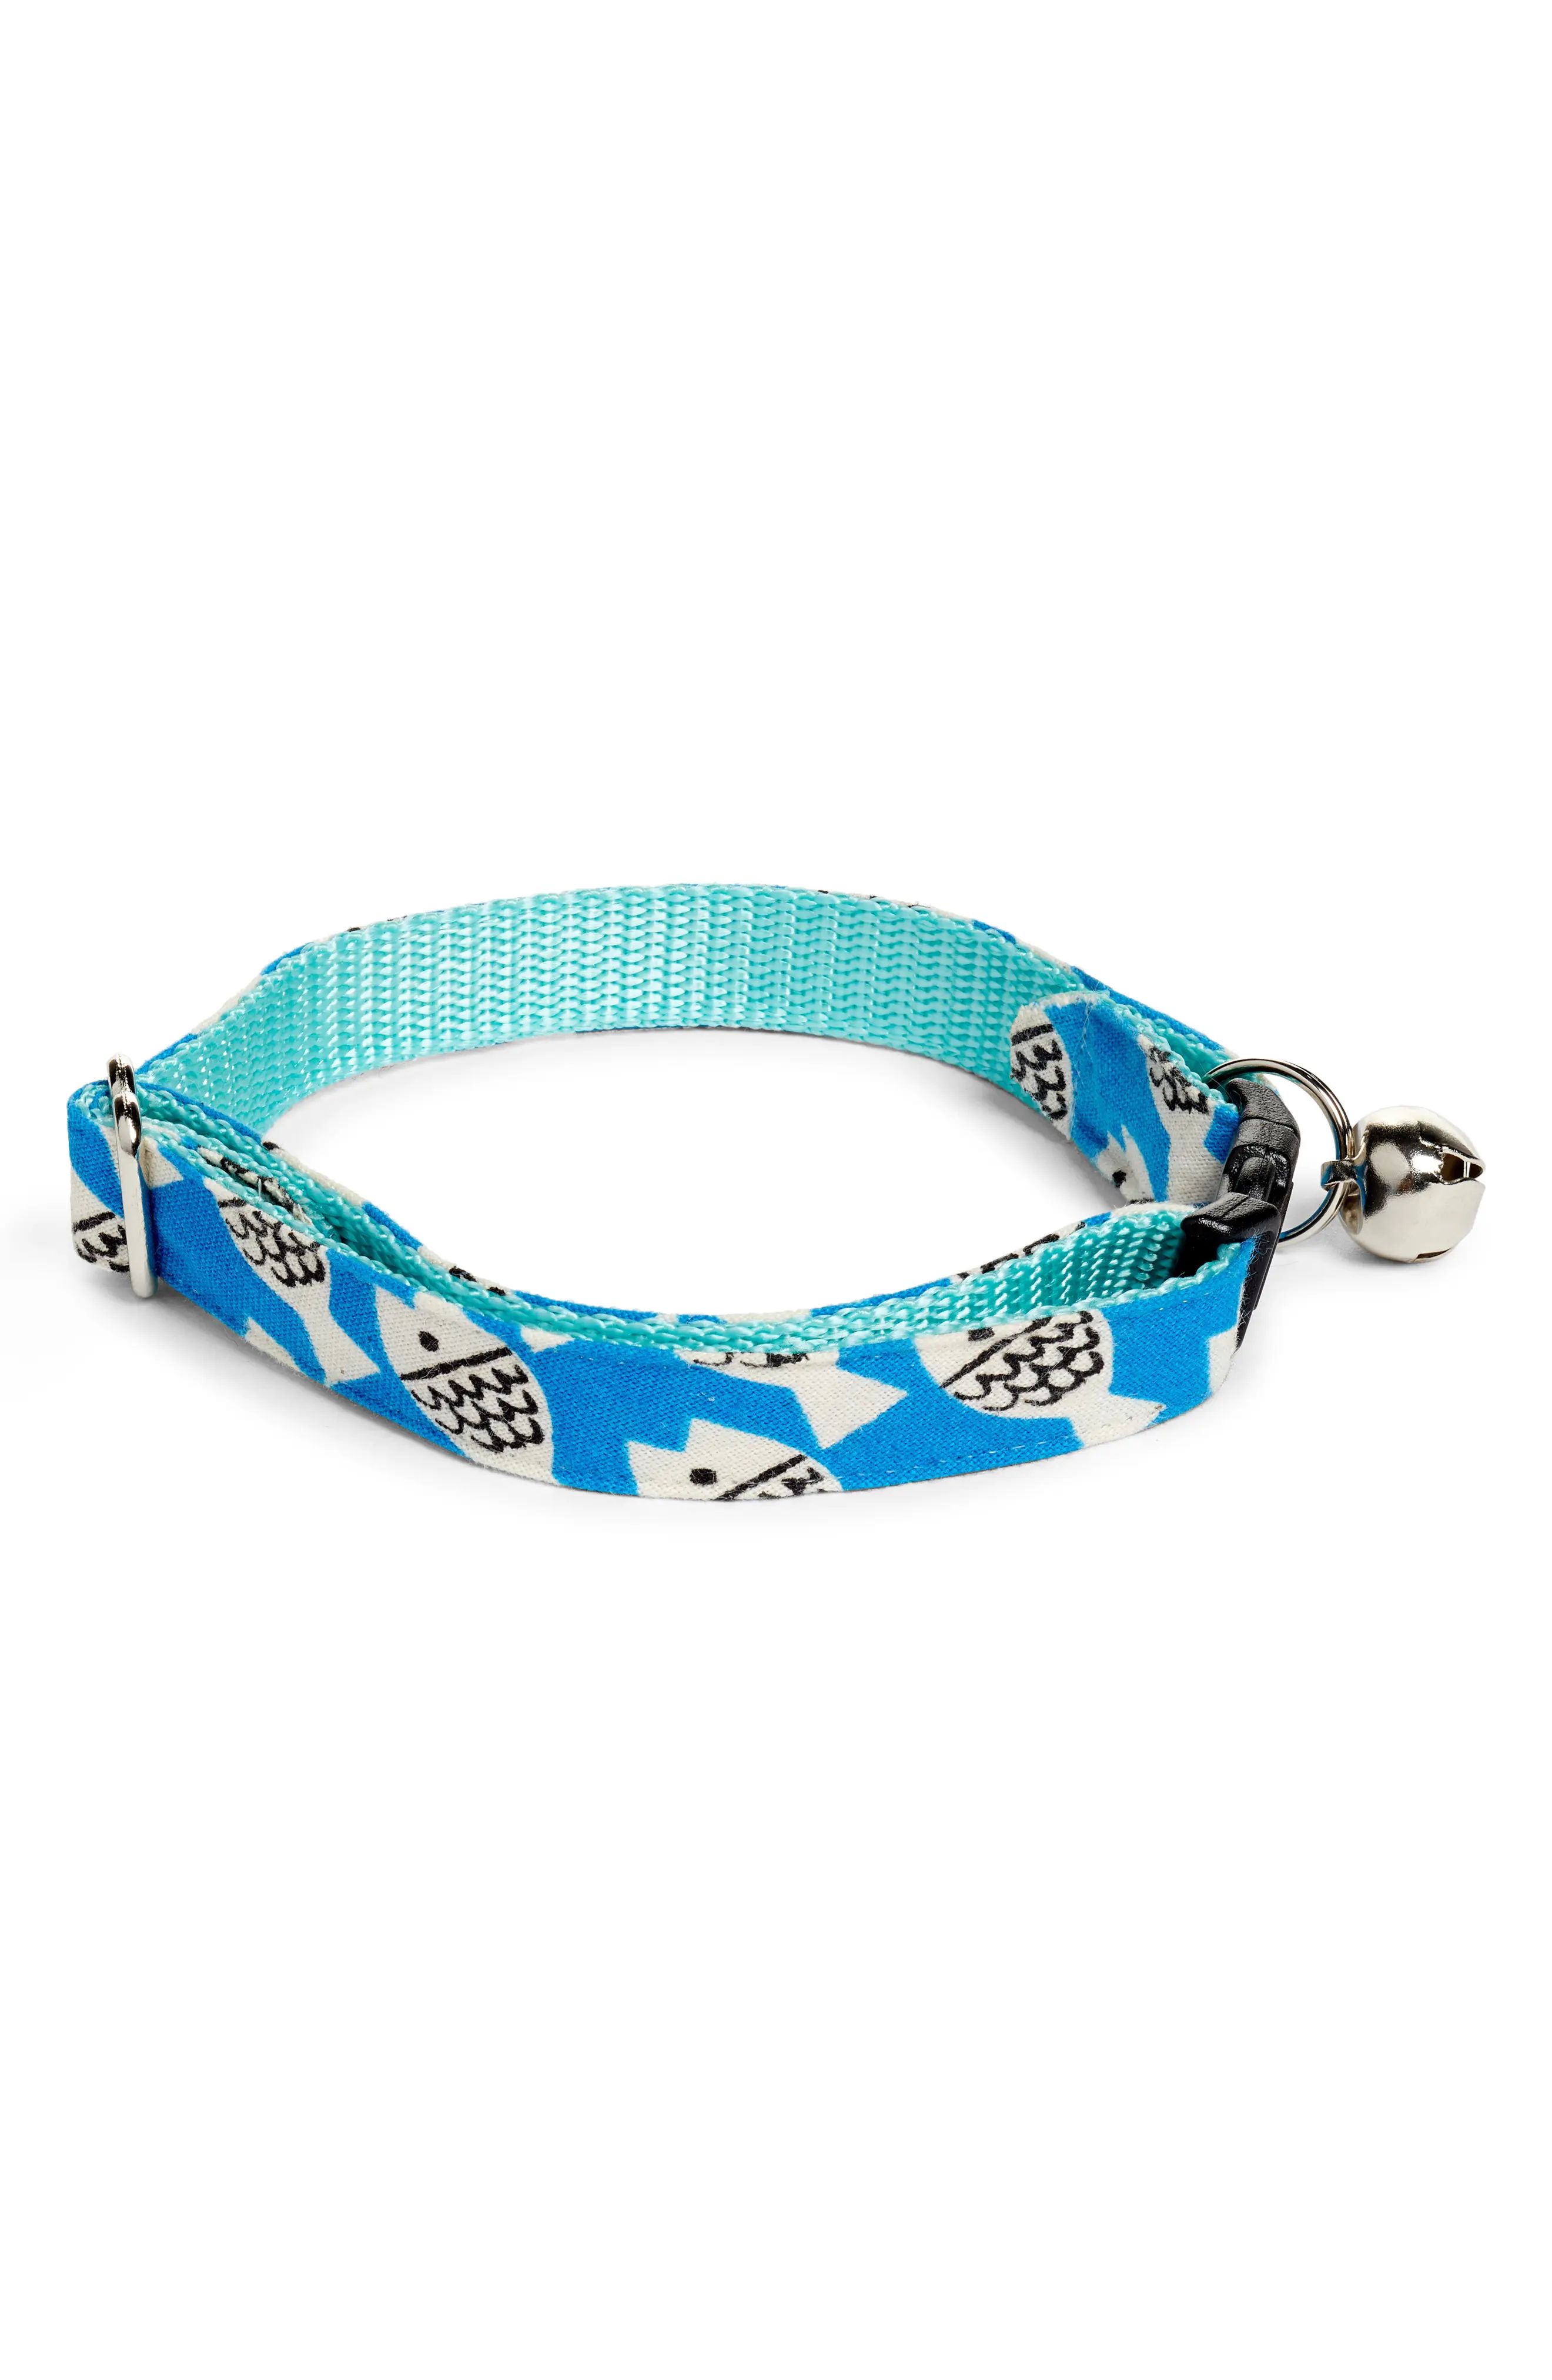 Made By Cleo Under The Sea Cat Collar, Size One Size - Blue | Nordstrom